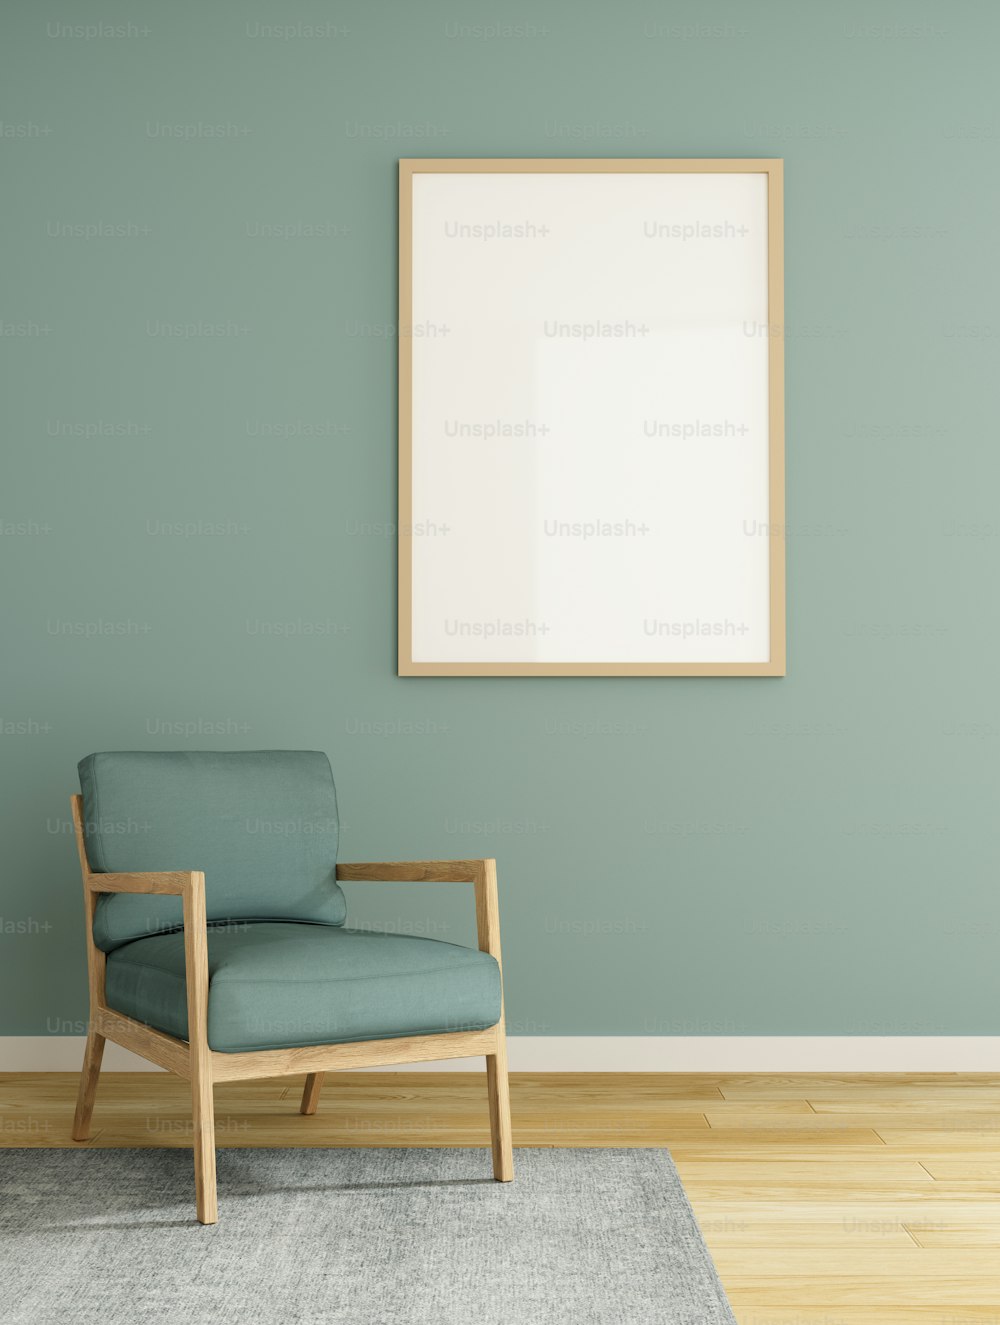 a chair in a room with a picture frame on the wall